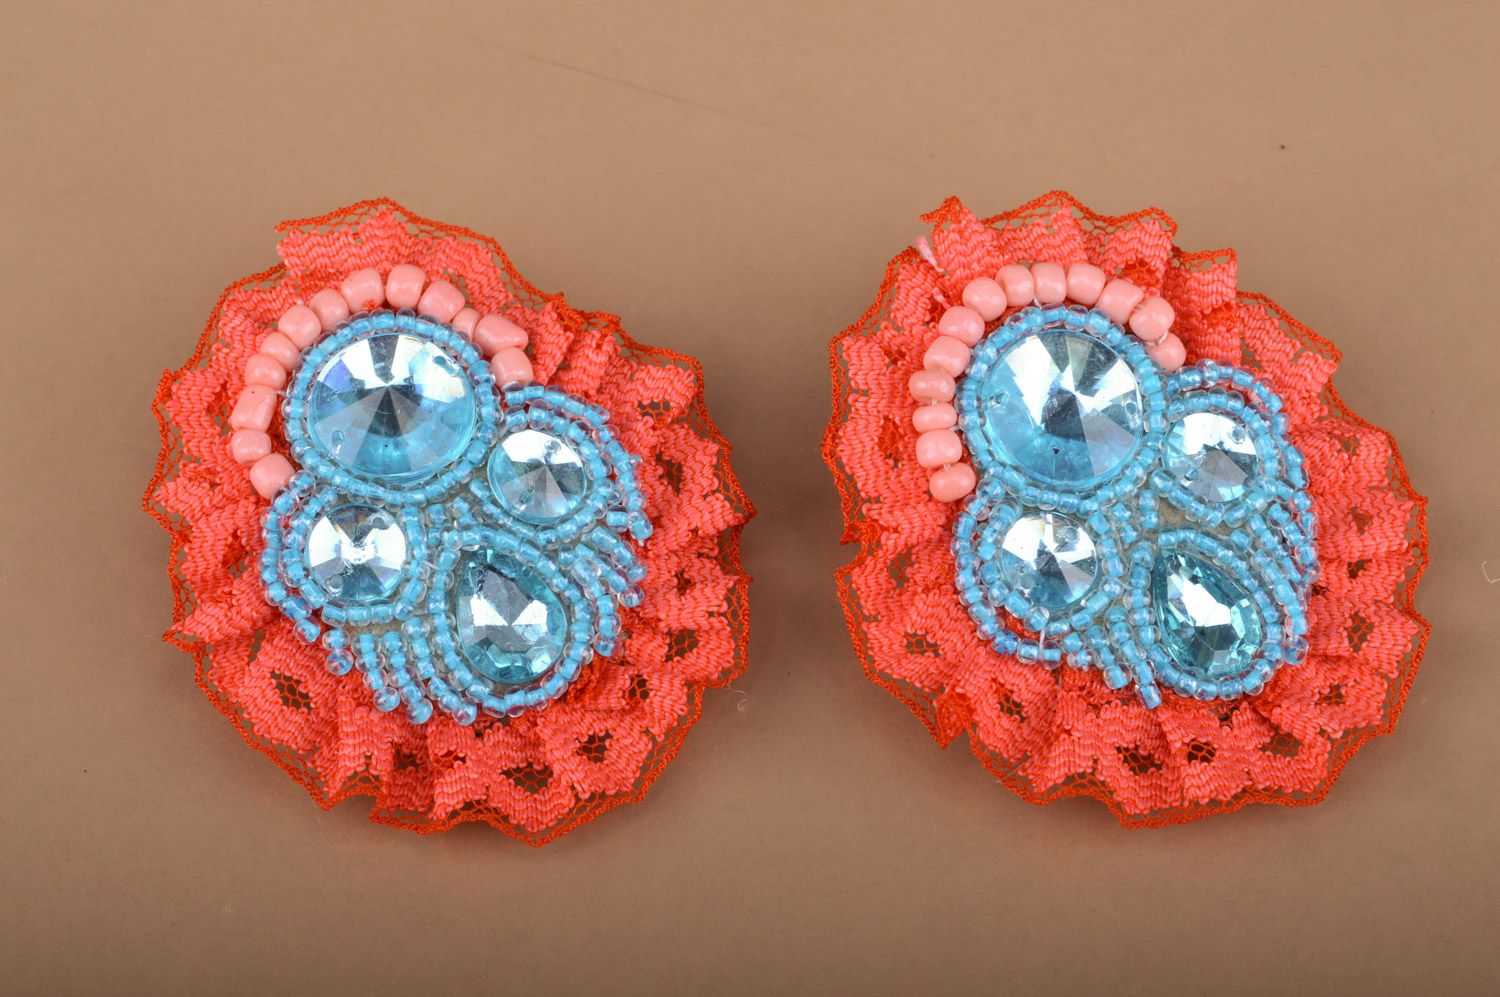 Handmade massive beaded earrings with stones and lace of red and blue colors photo 1